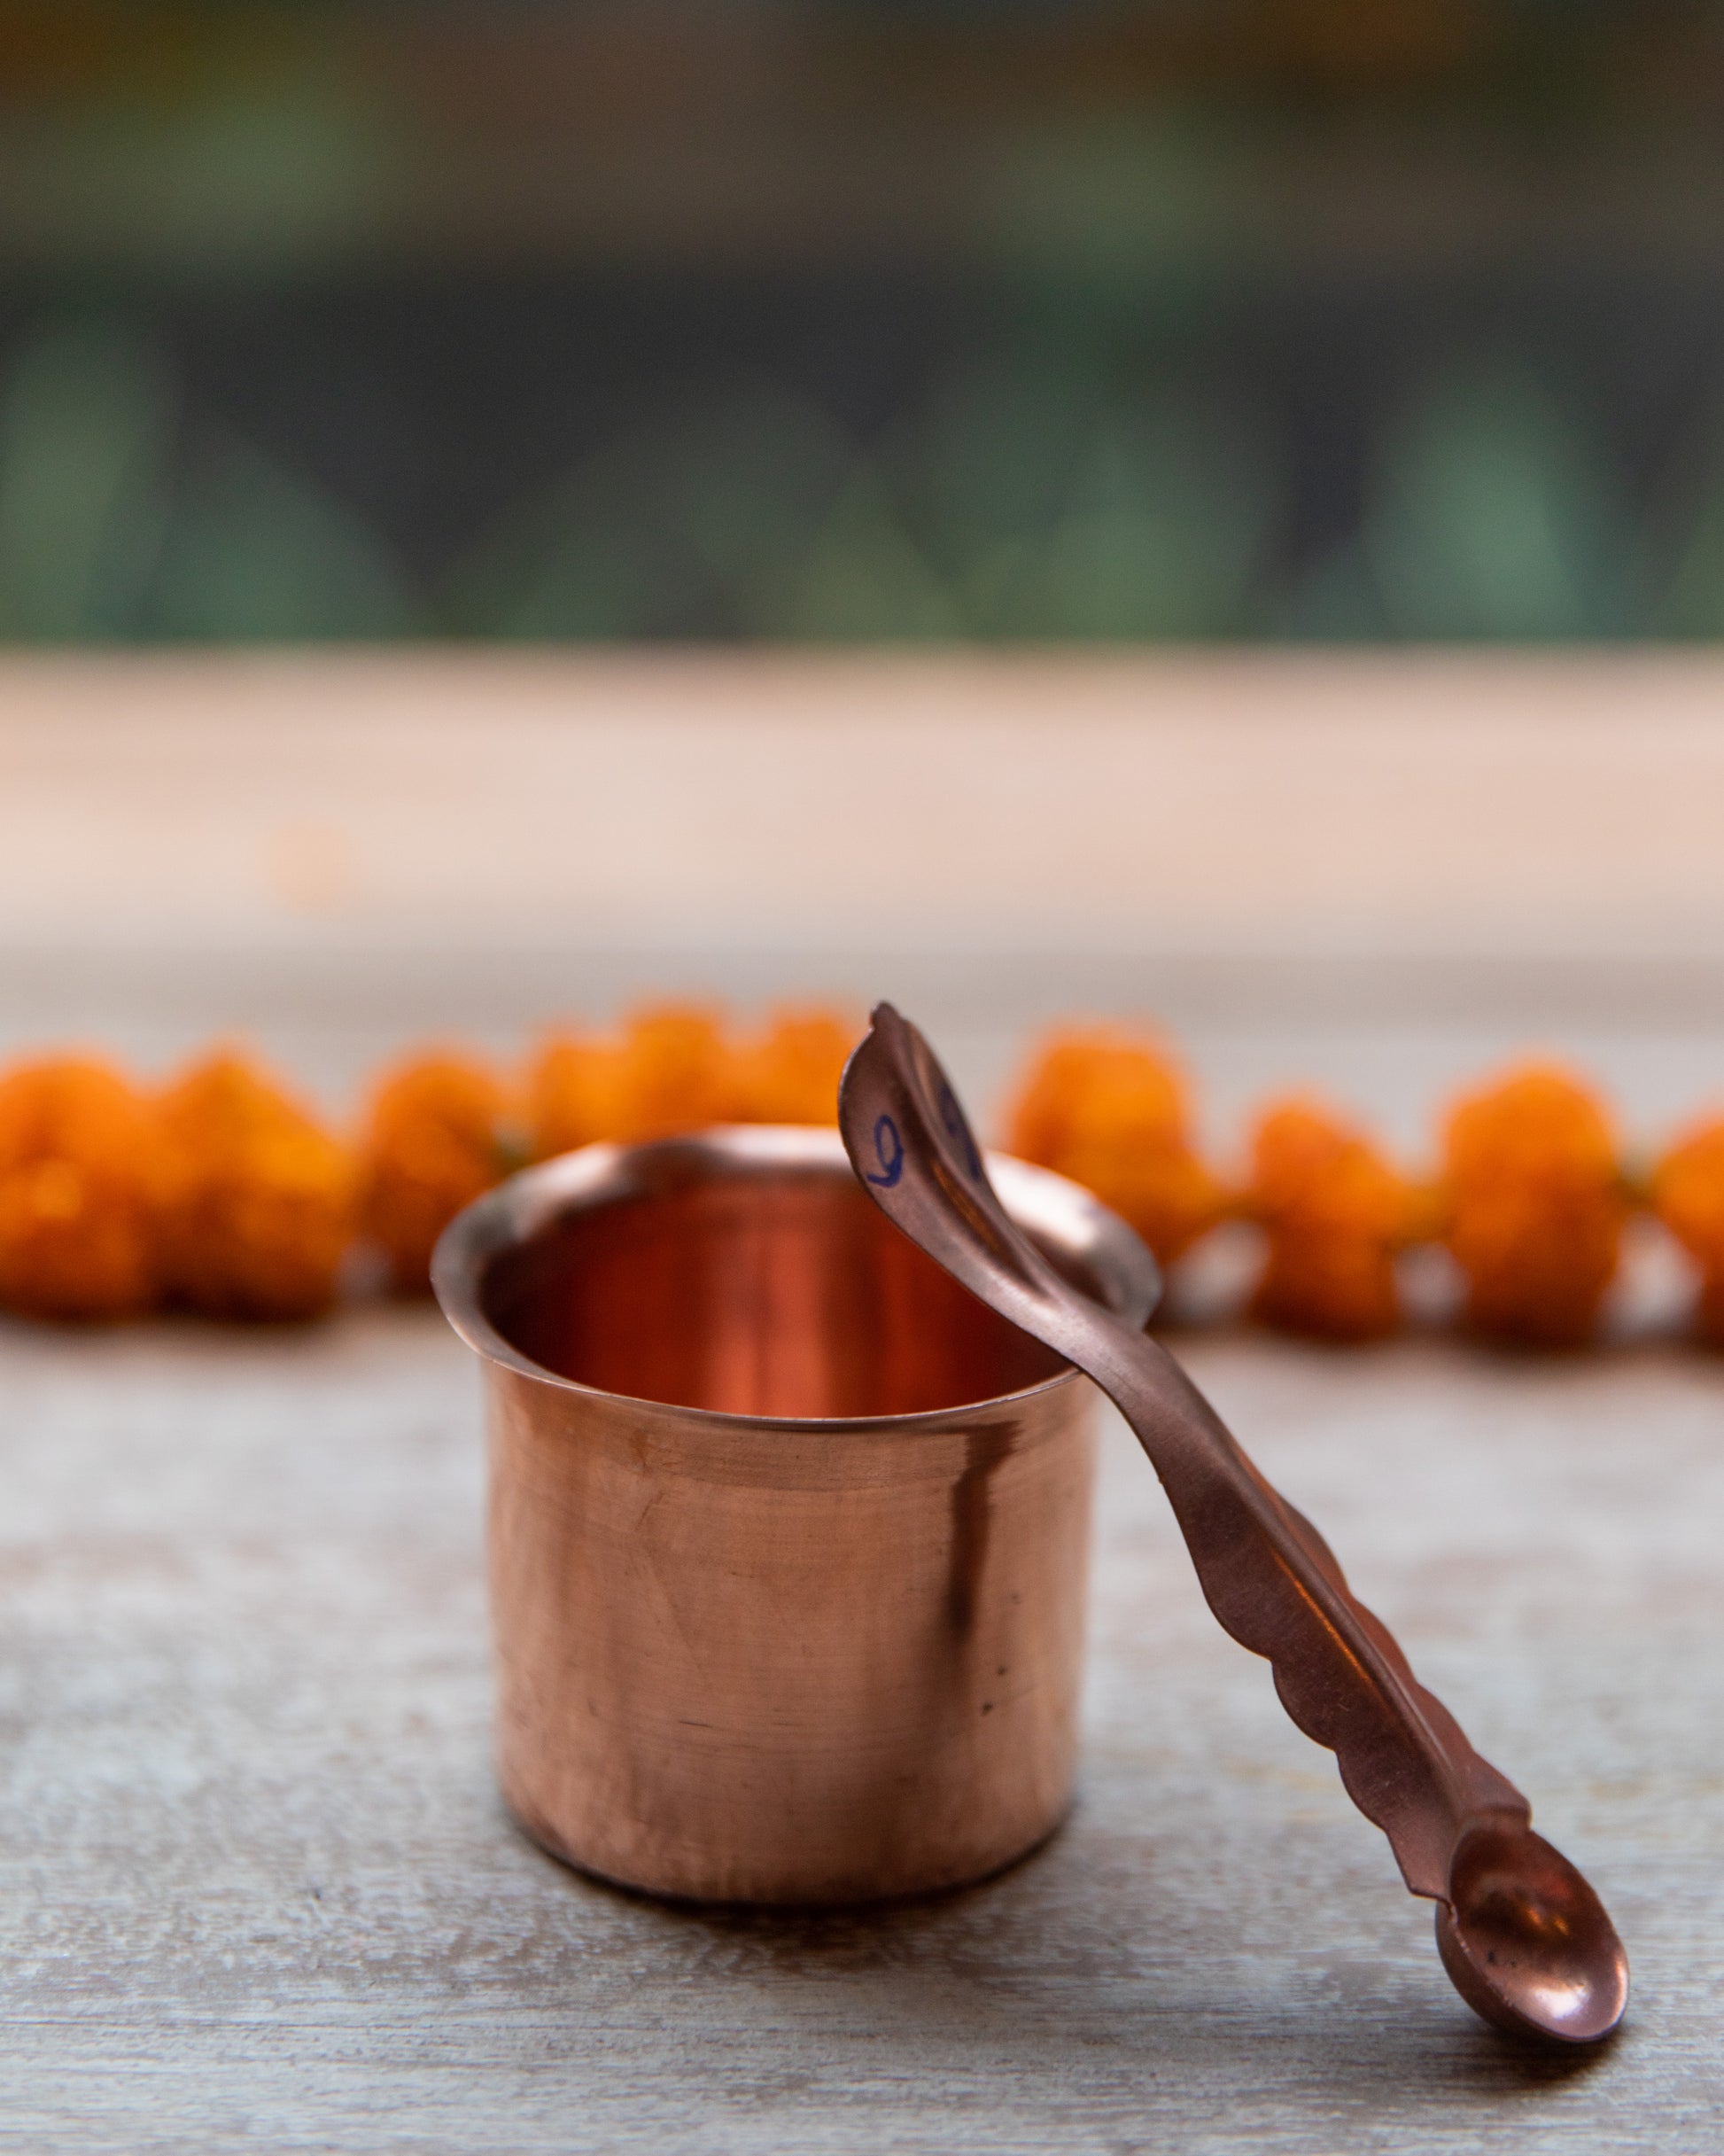 Achmani Patra Is a traditional item used in Vedic temple worship for purification.